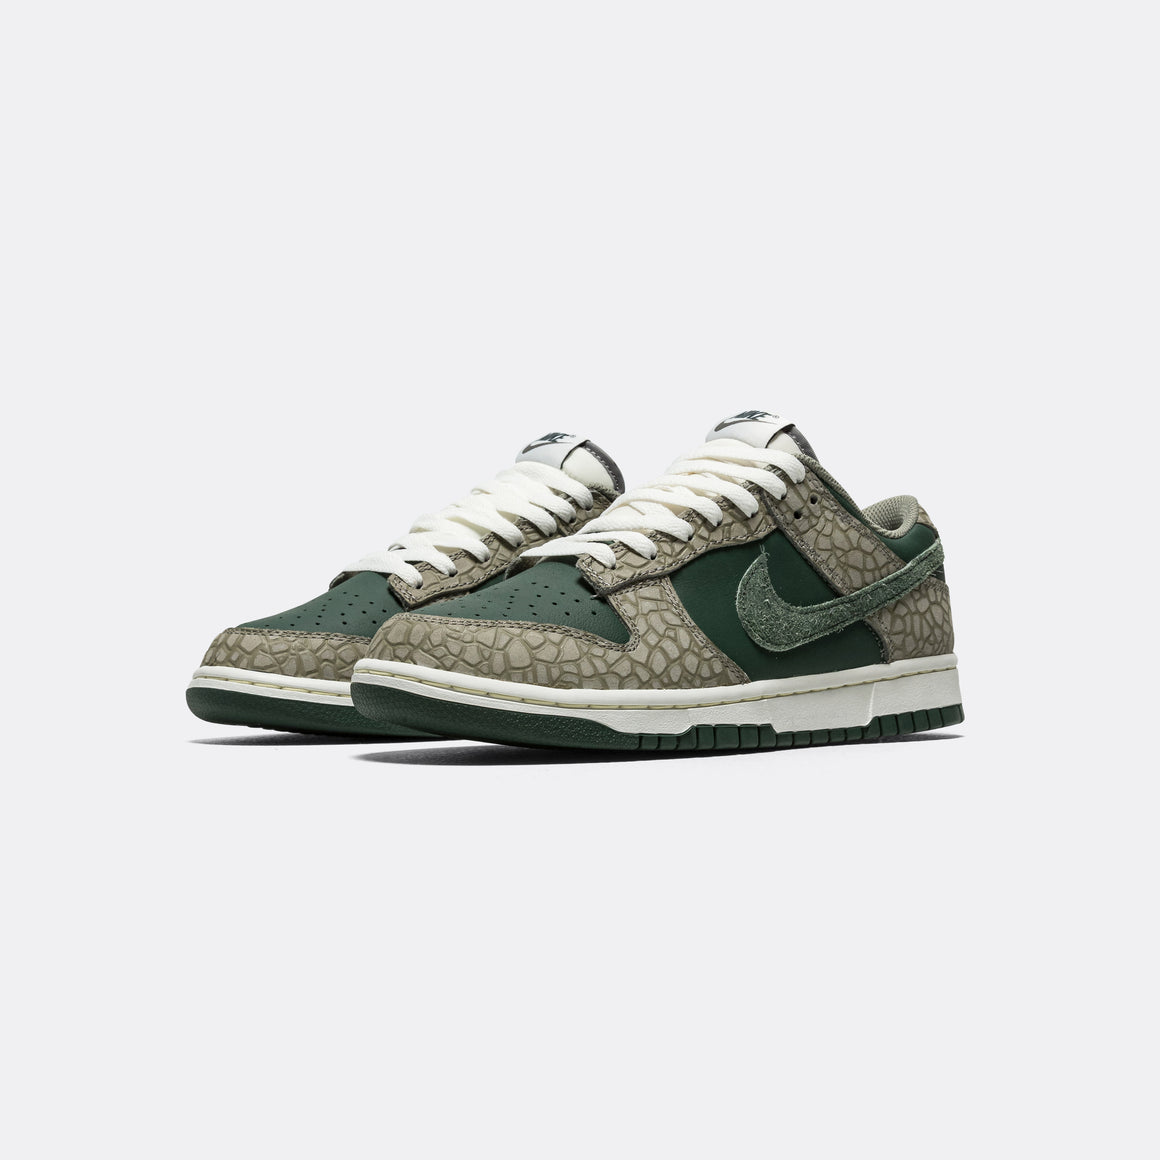 Nike - Dunk Low Retro PRM - Dark Stucco/Vintage Green-Summit White - UP THERE